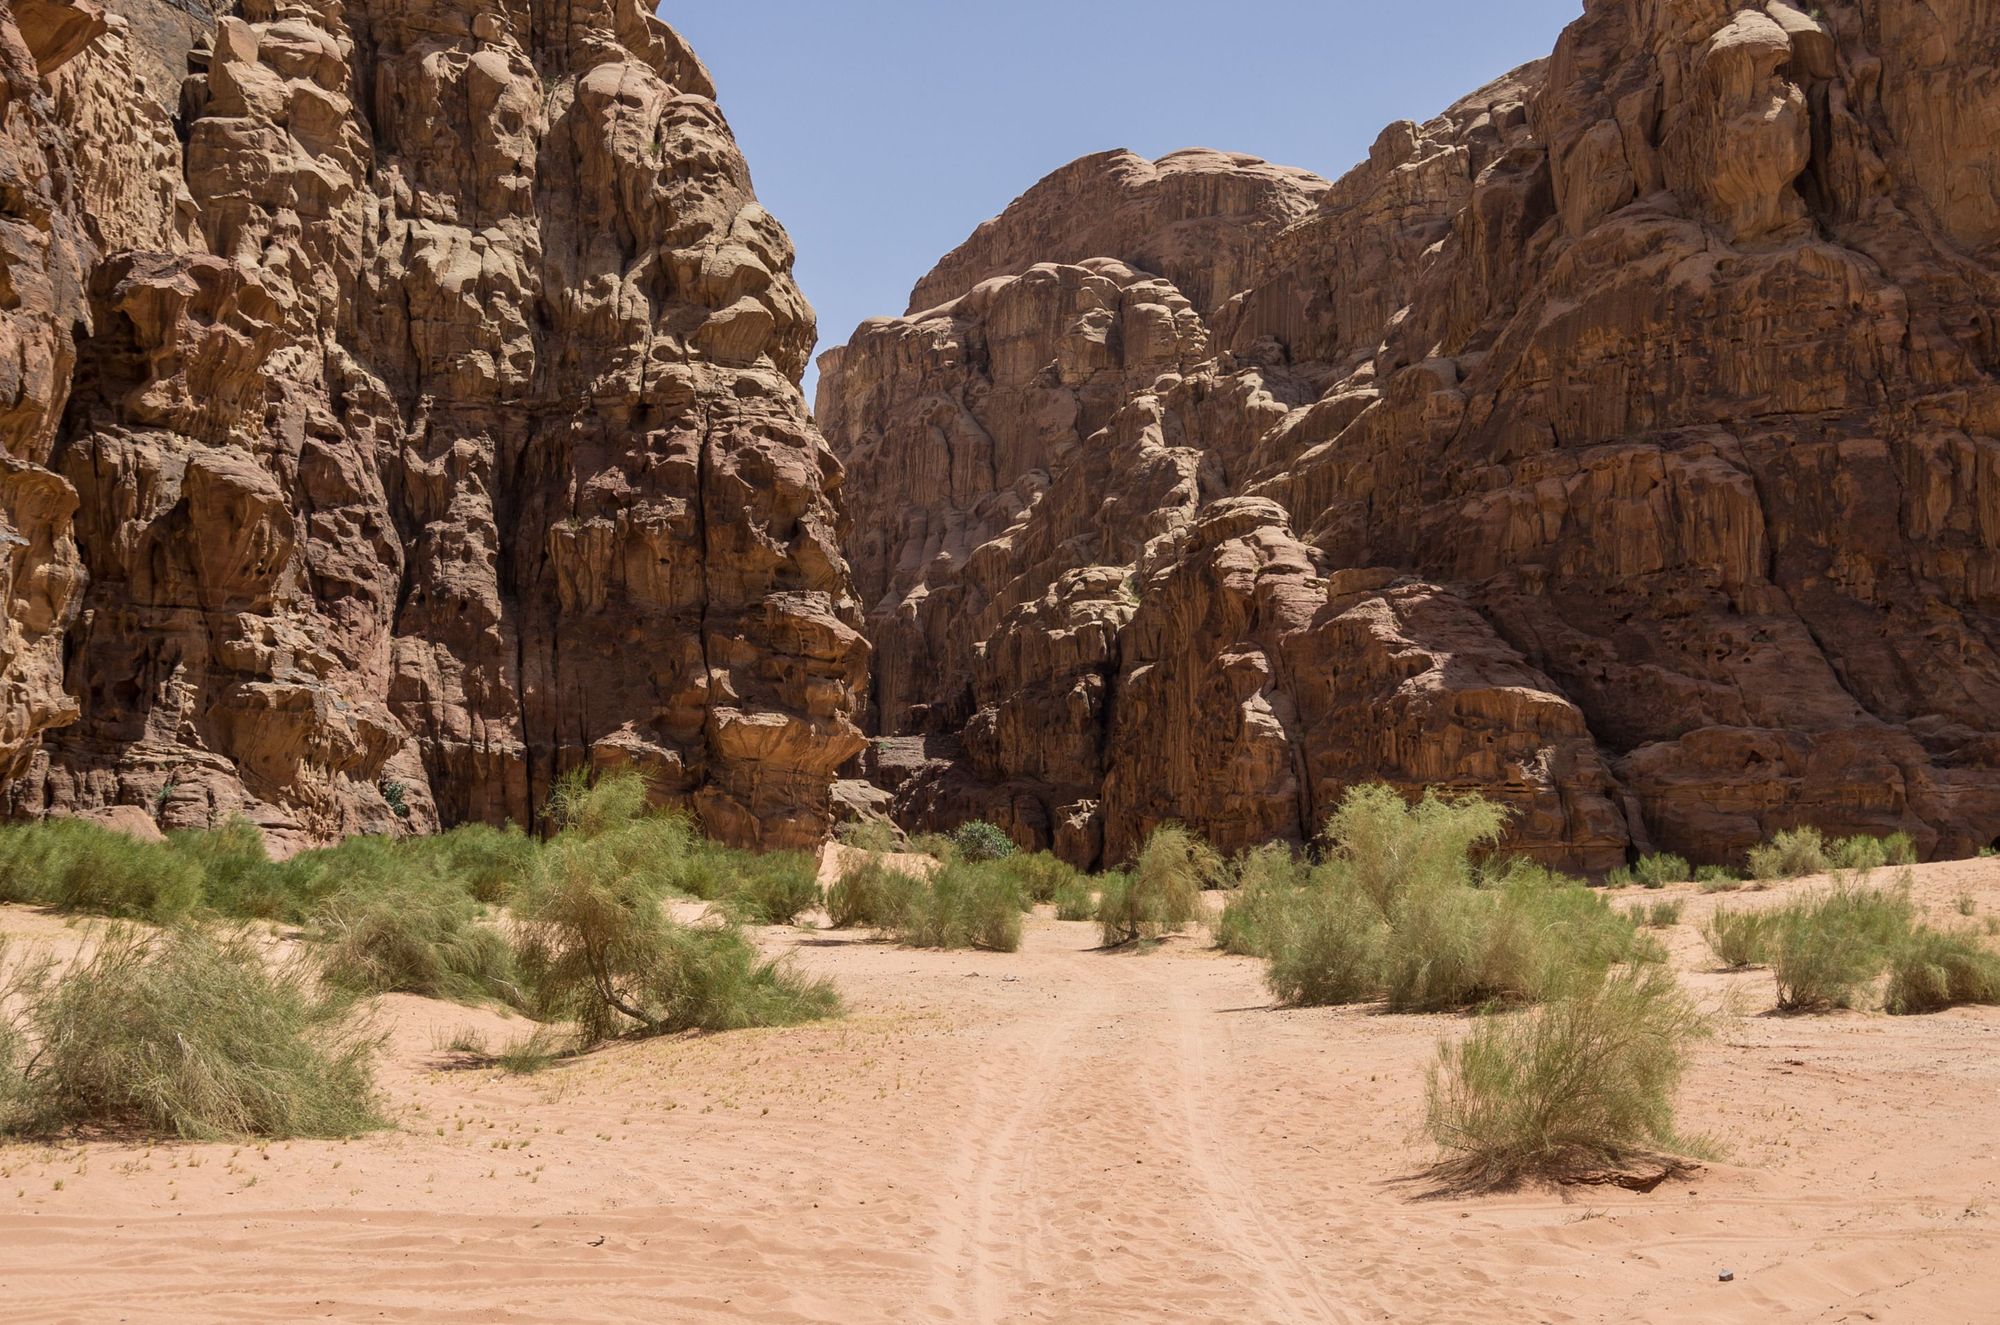 The entrance to Barrah Canyon, in Wadi Rum.